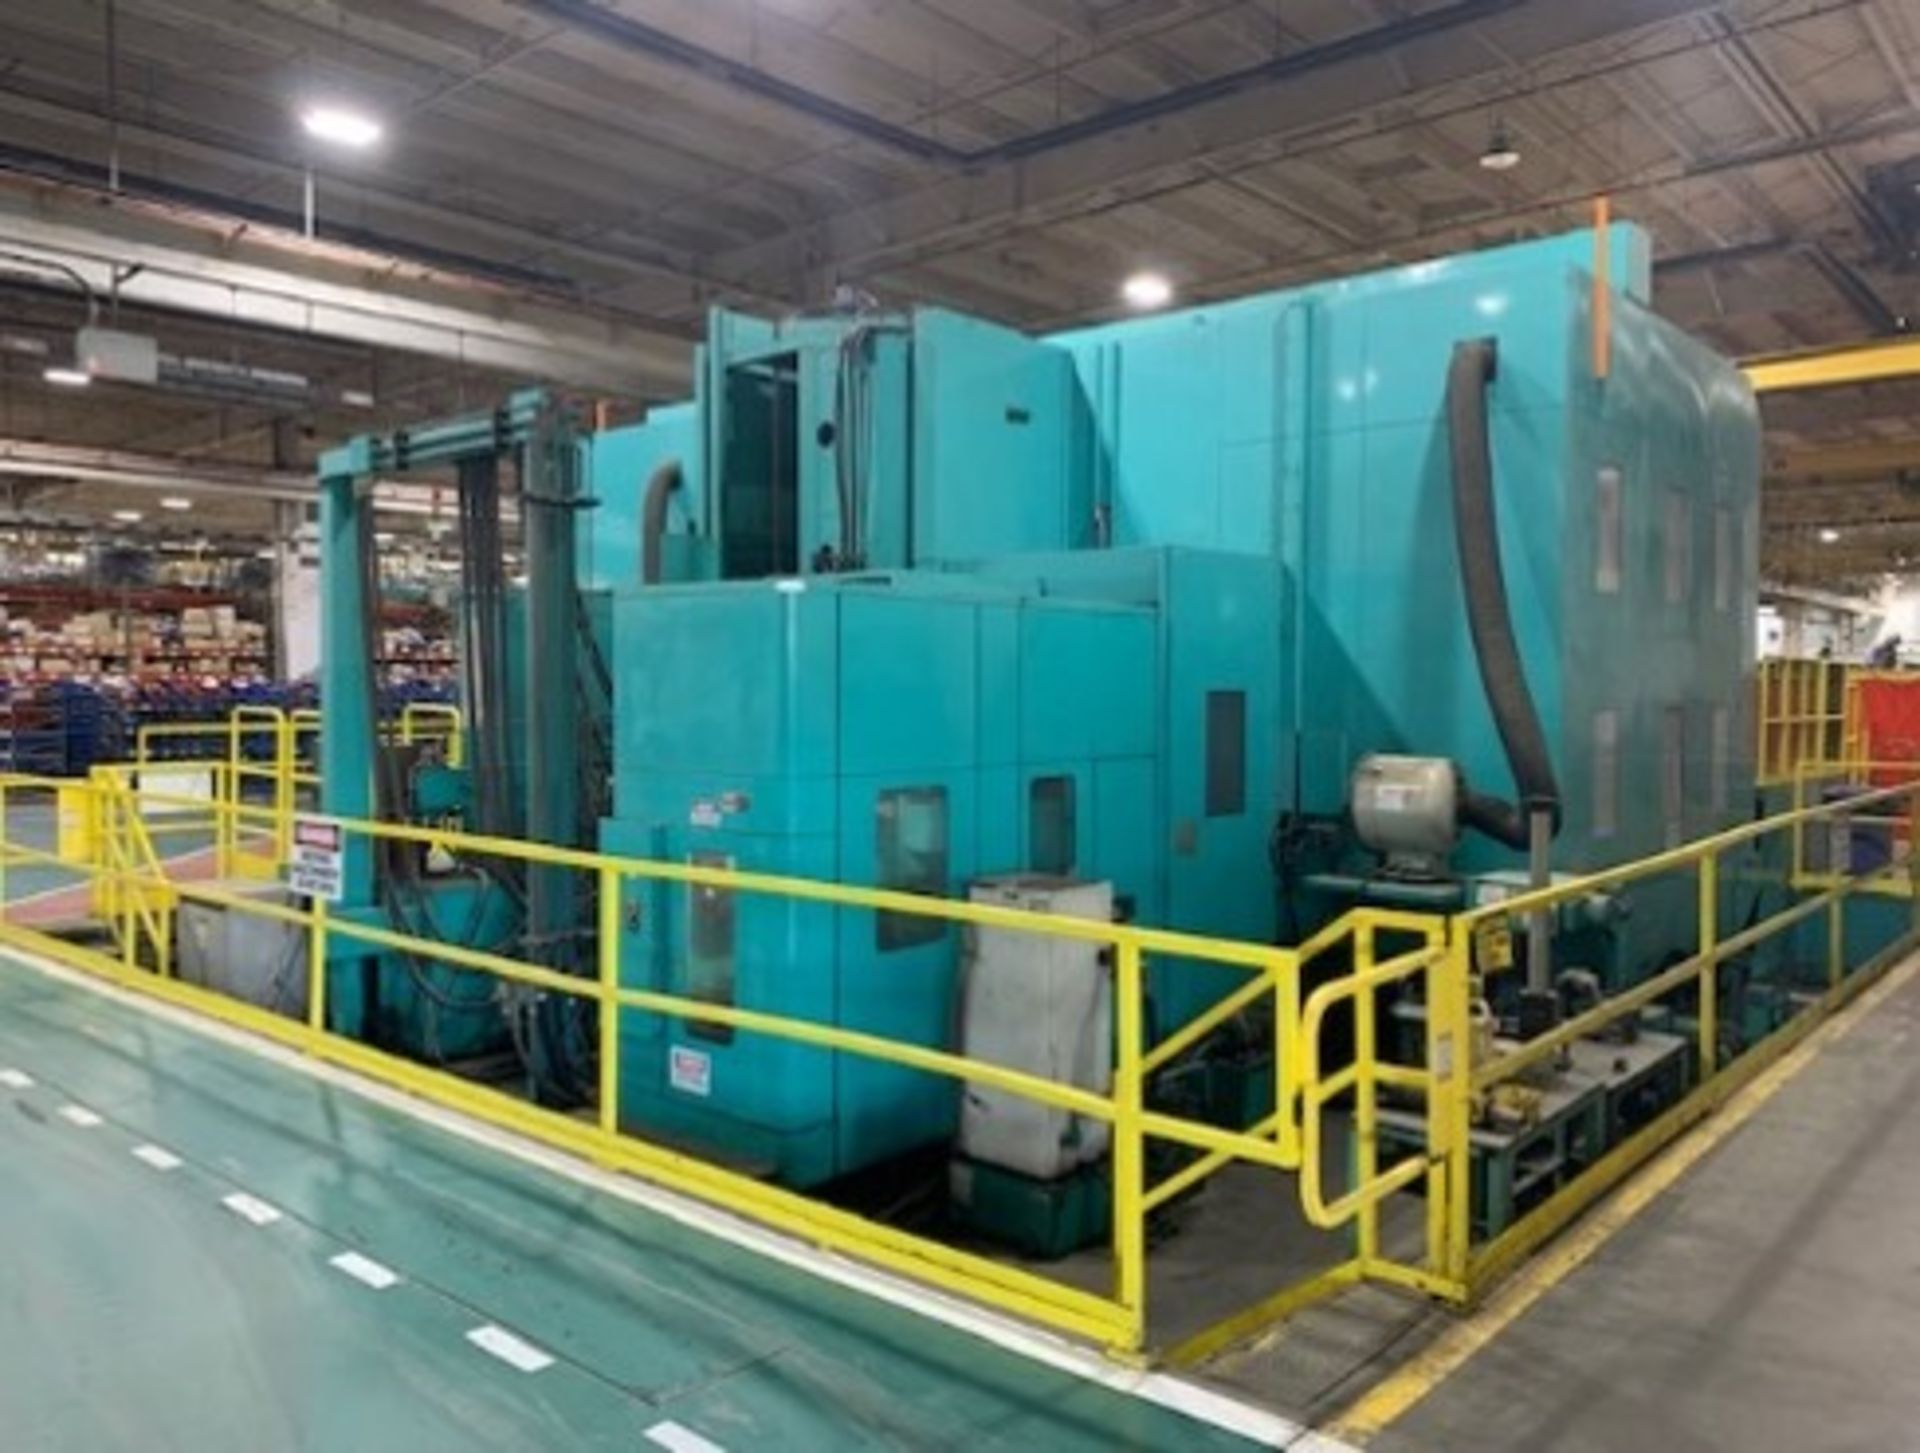 Toshiba BP-130-R22 5-Axis Horizontal Boring & Milling Machine (NOTE: LOCATED IN NEWBERRY, SOUTH CARO - Image 12 of 32